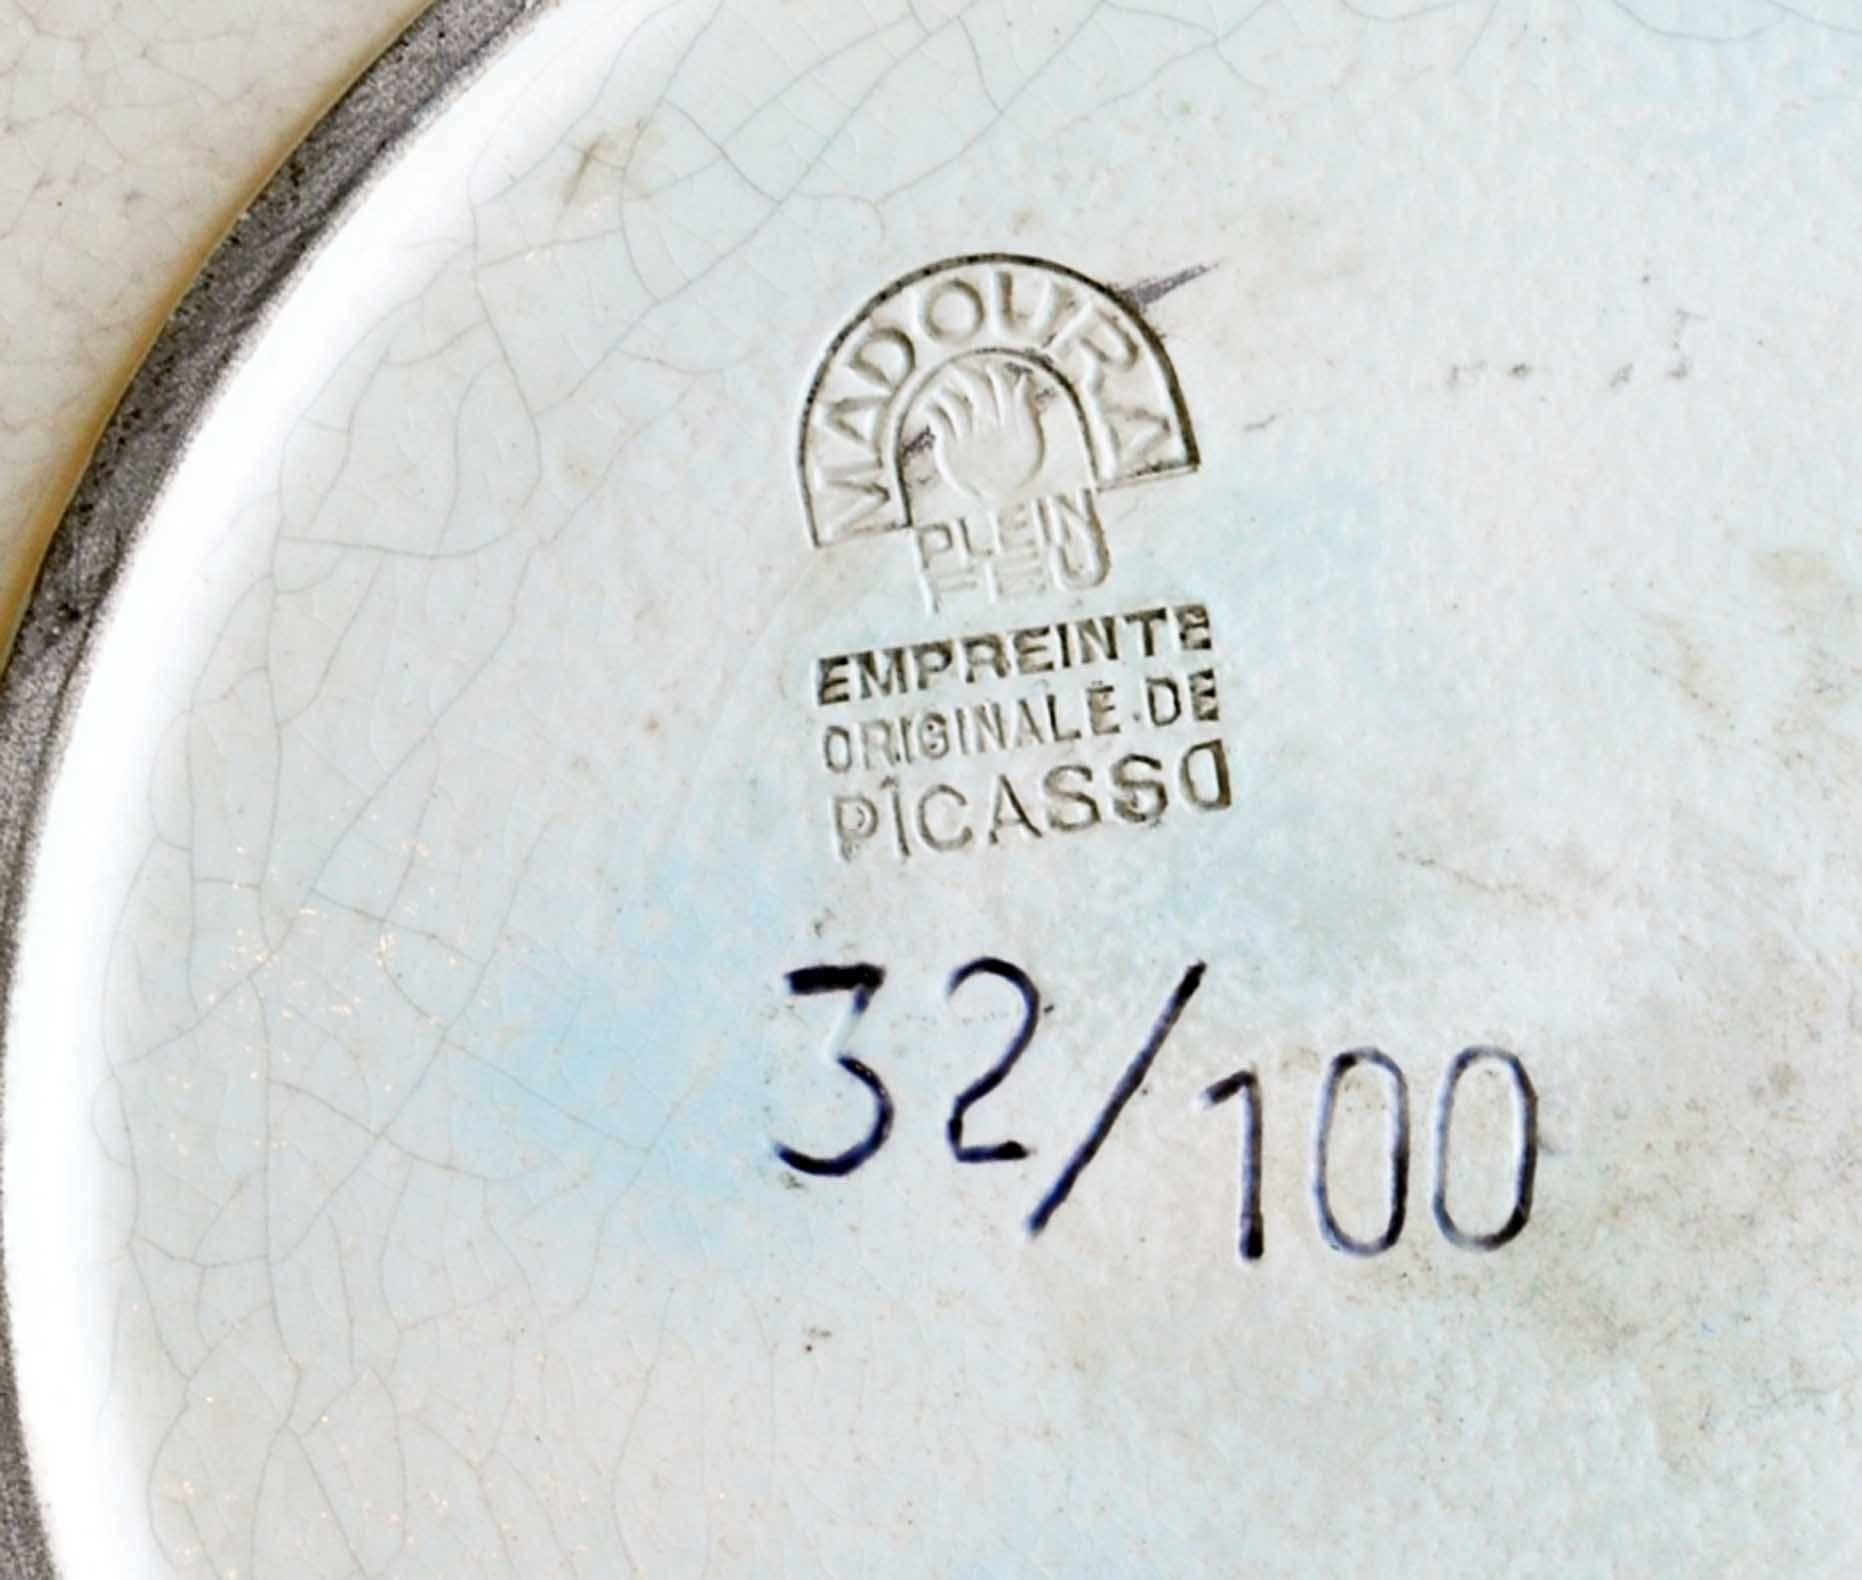 Ceramic plate by Pablo Picasso from his famous bull fighting series. This is number 32 of a small edition of 100. The date on the front is 11/6/59. The back is impresses with: Empreinte, Originale de Picasso, #32/100 Madoura/plein feu.